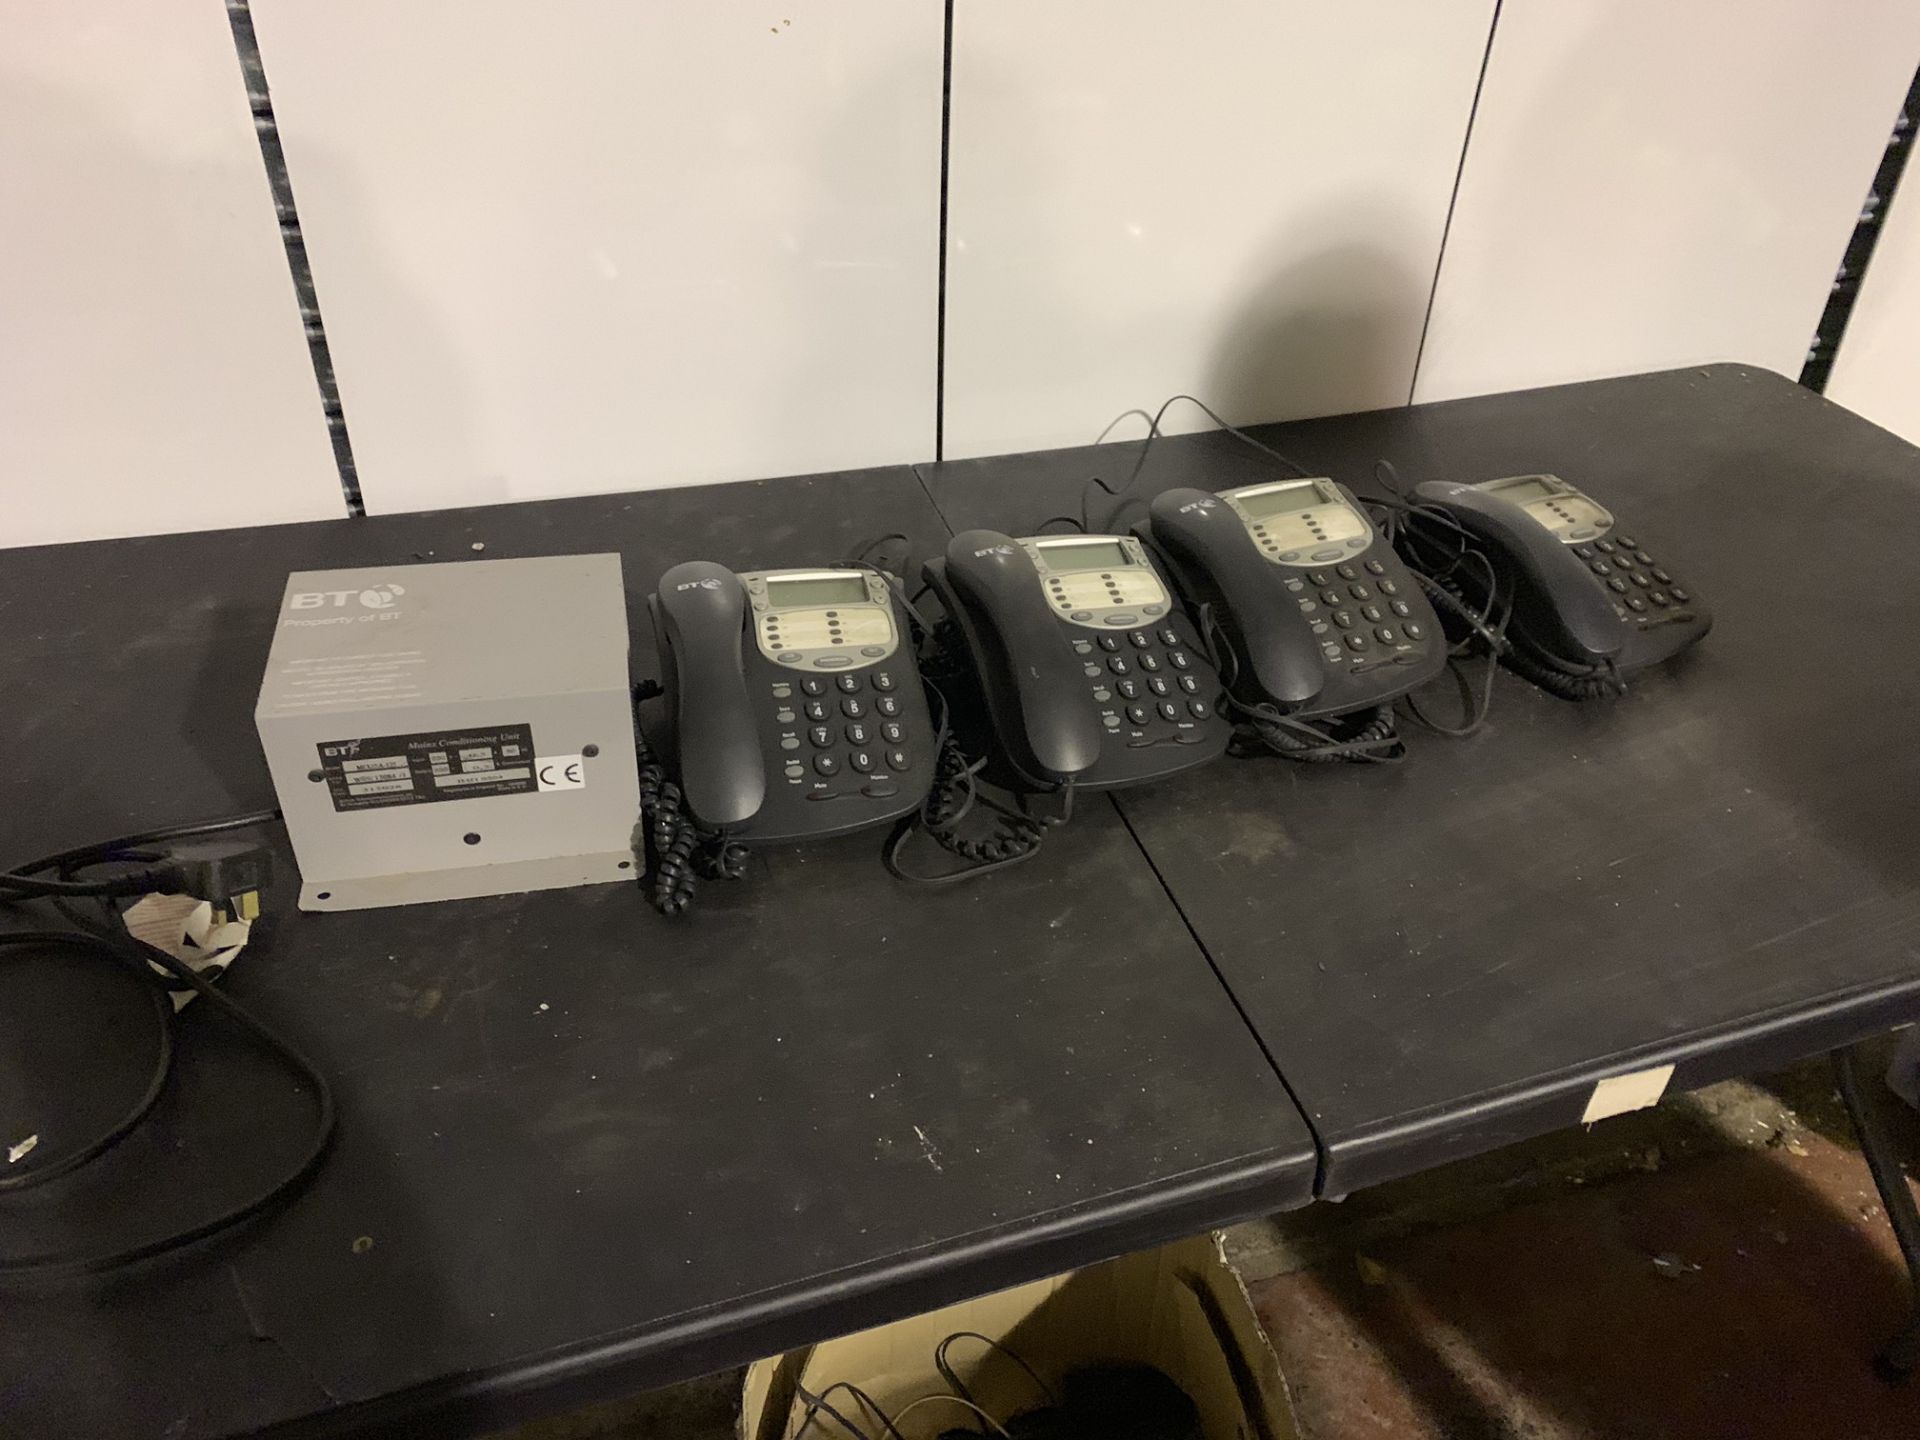 BT PHONES AND BT CONDITIONING UNIT